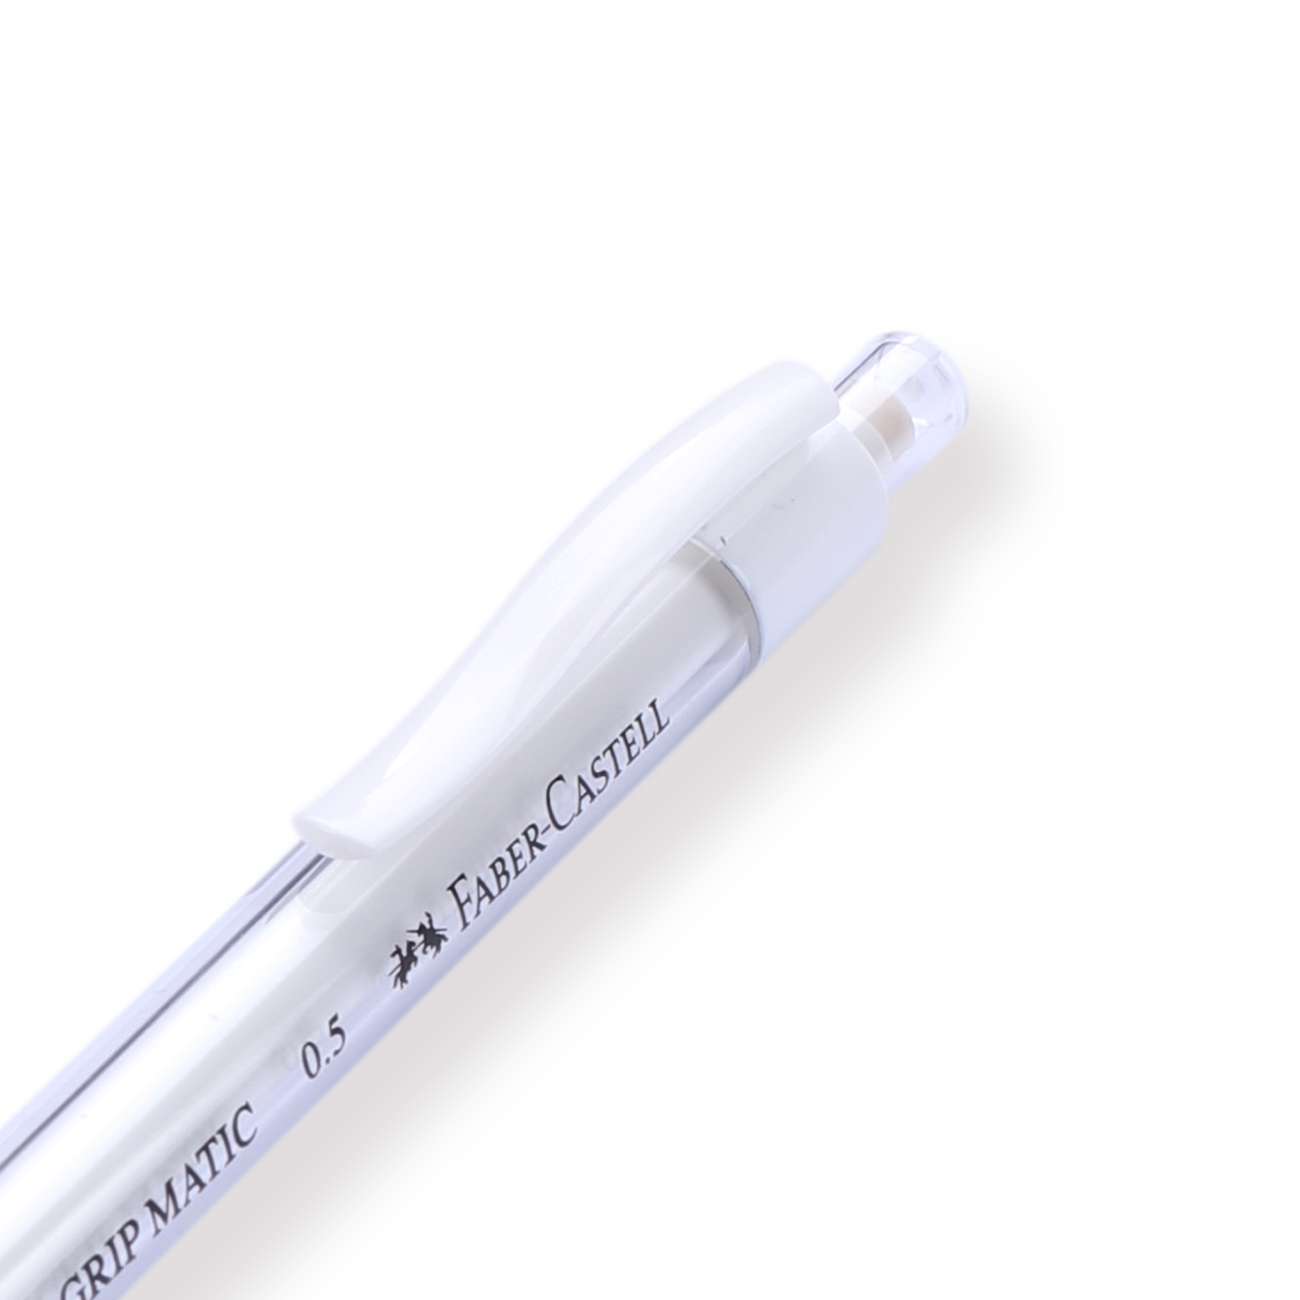 Faber-Castell Mechanical Pencil - 0.5 mm - White Body - Stationery Pal